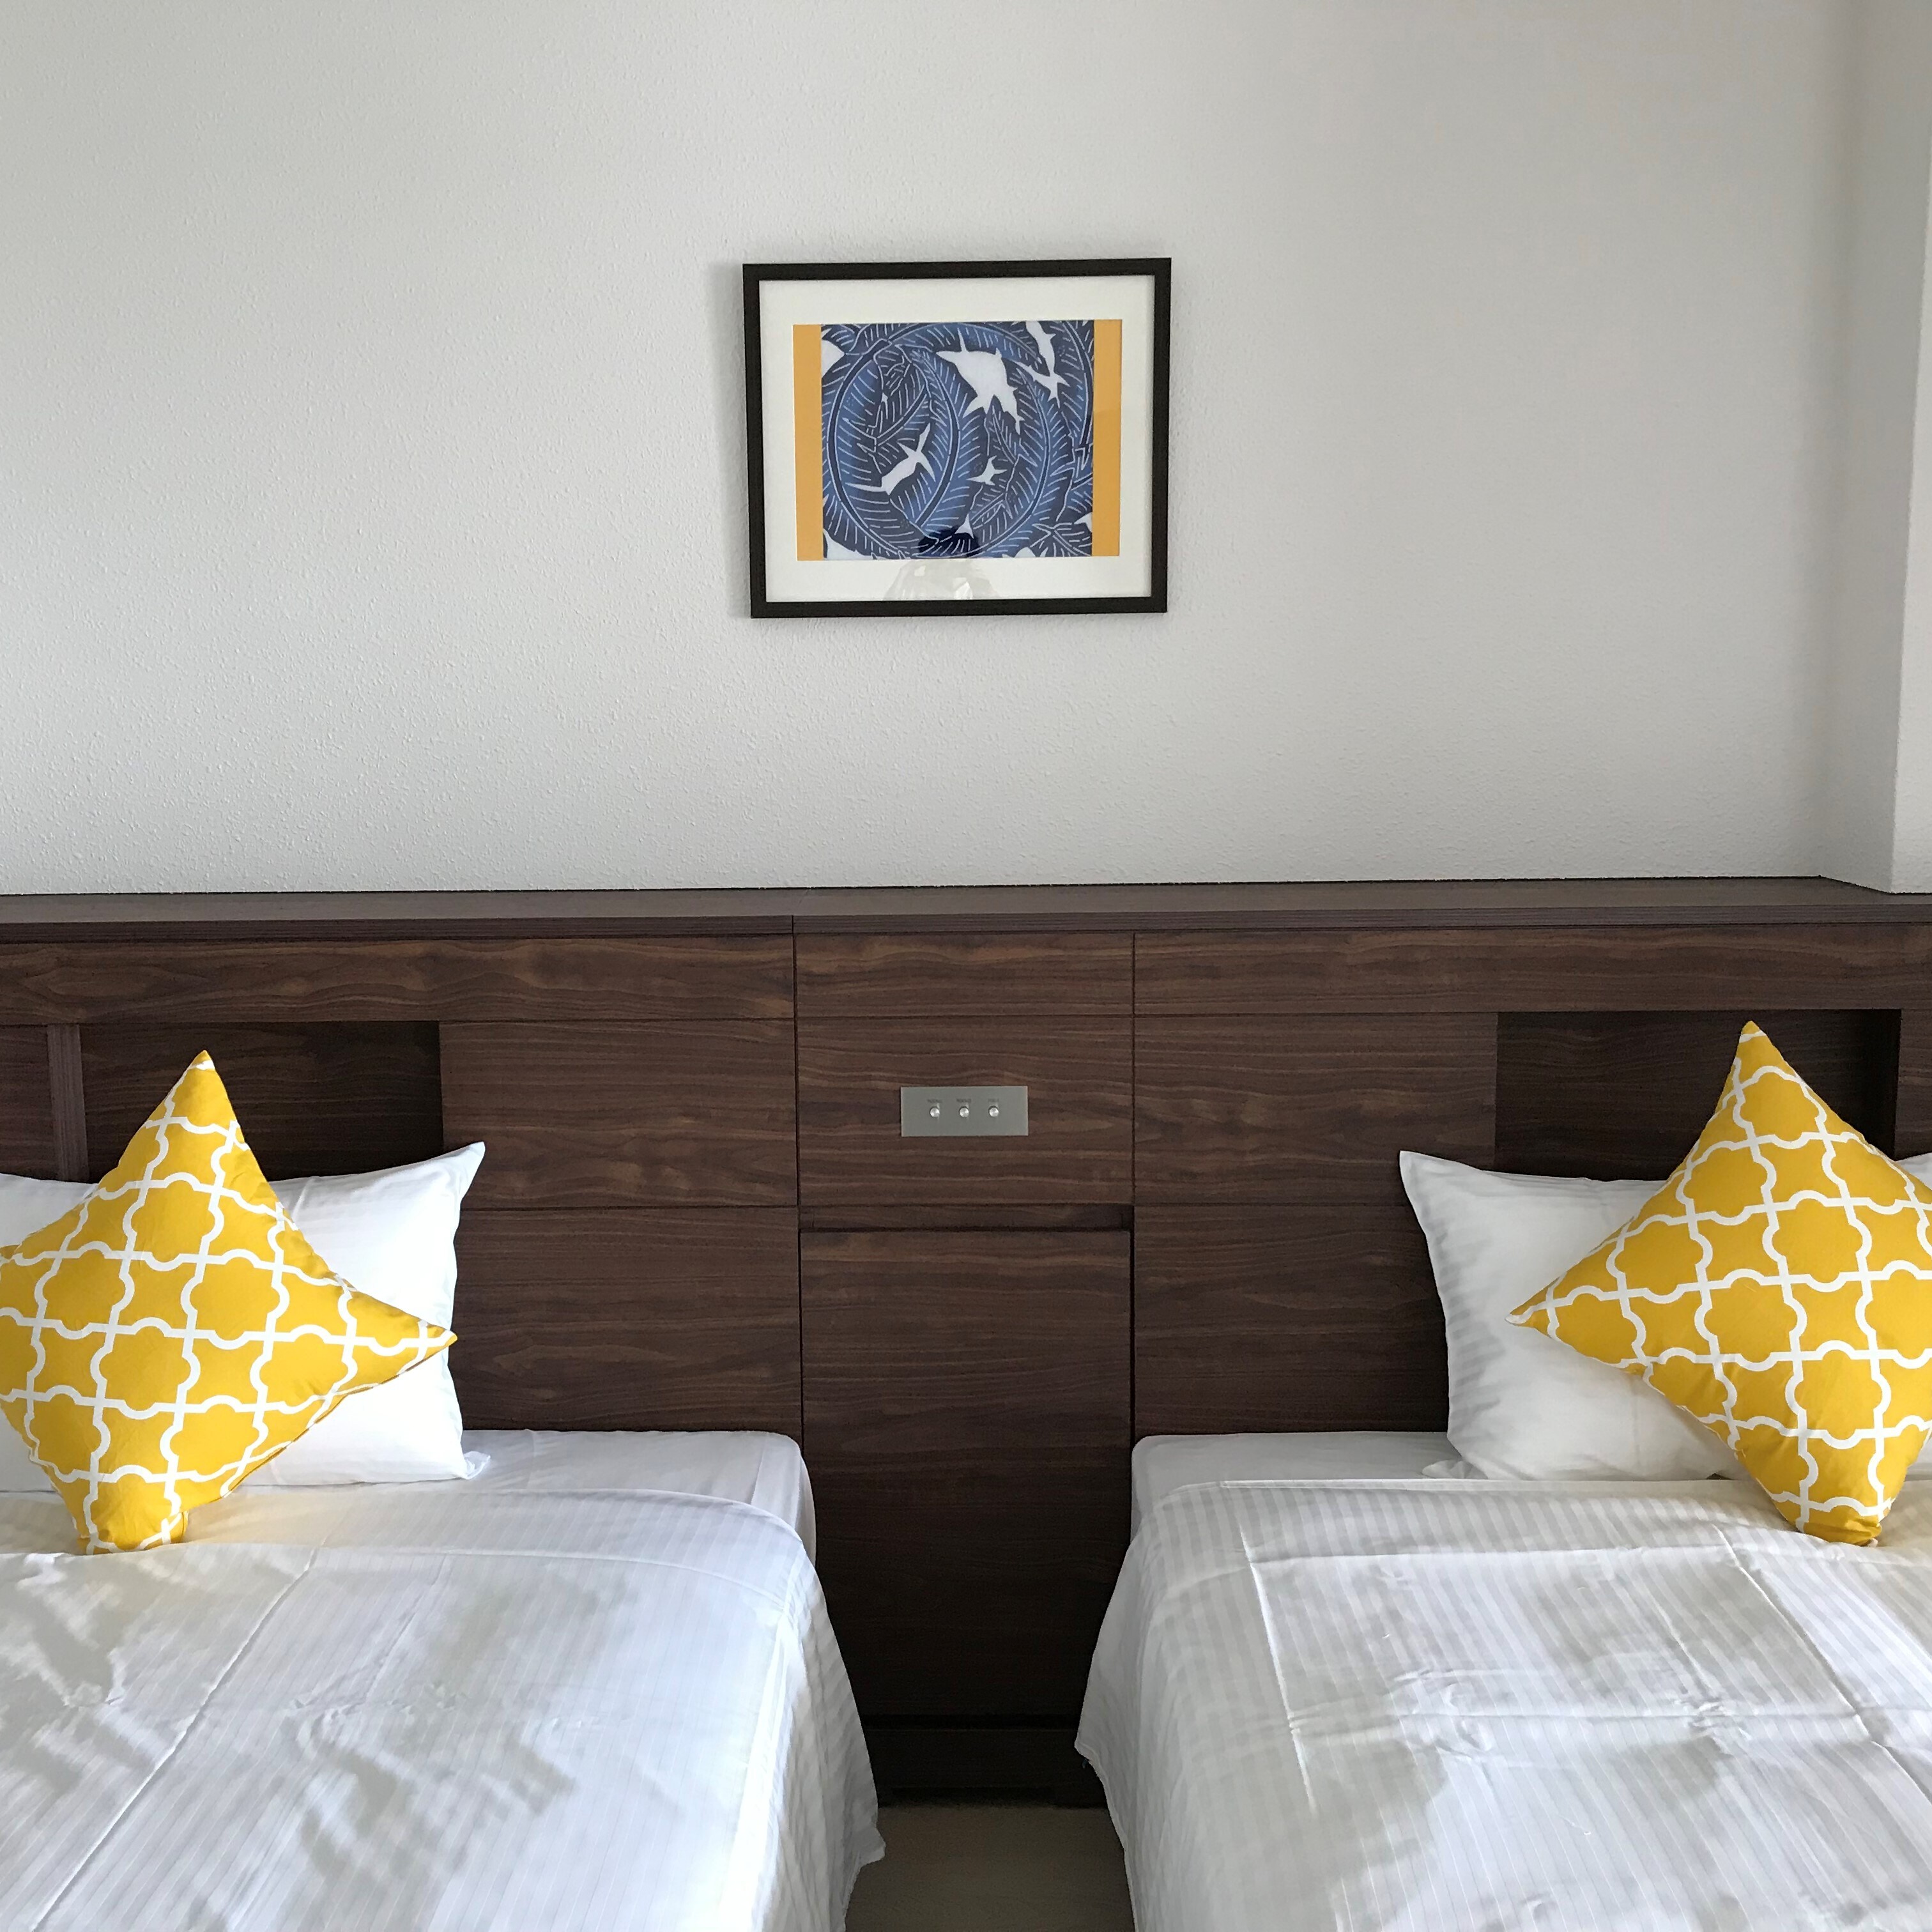 The headboard is fully equipped with an outlet and USB